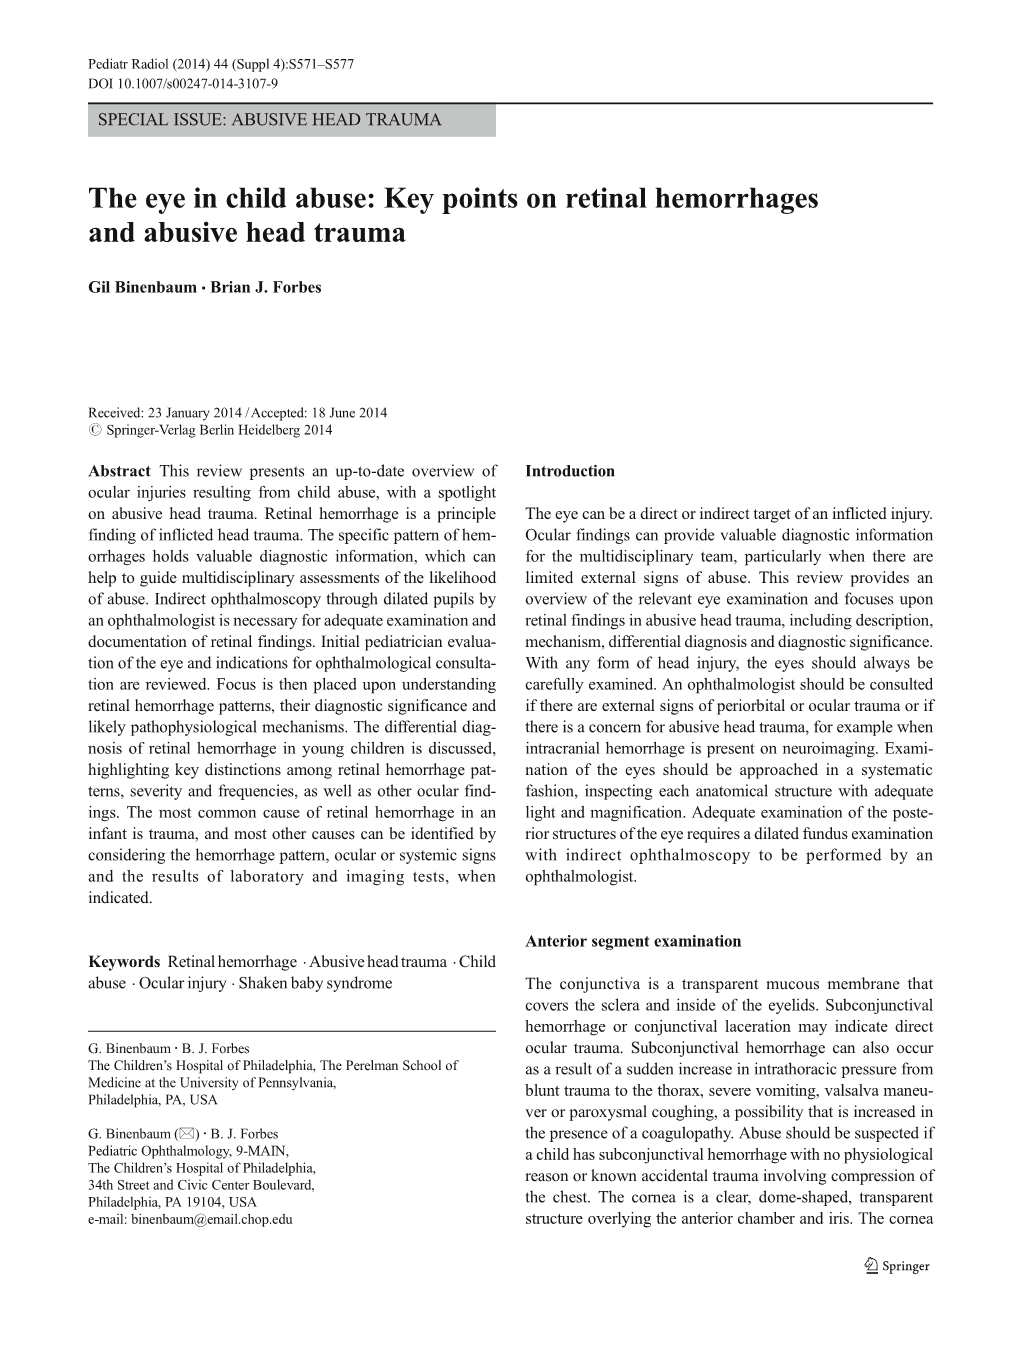 The Eye in Child Abuse: Key Points on Retinal Hemorrhages and Abusive Head Trauma